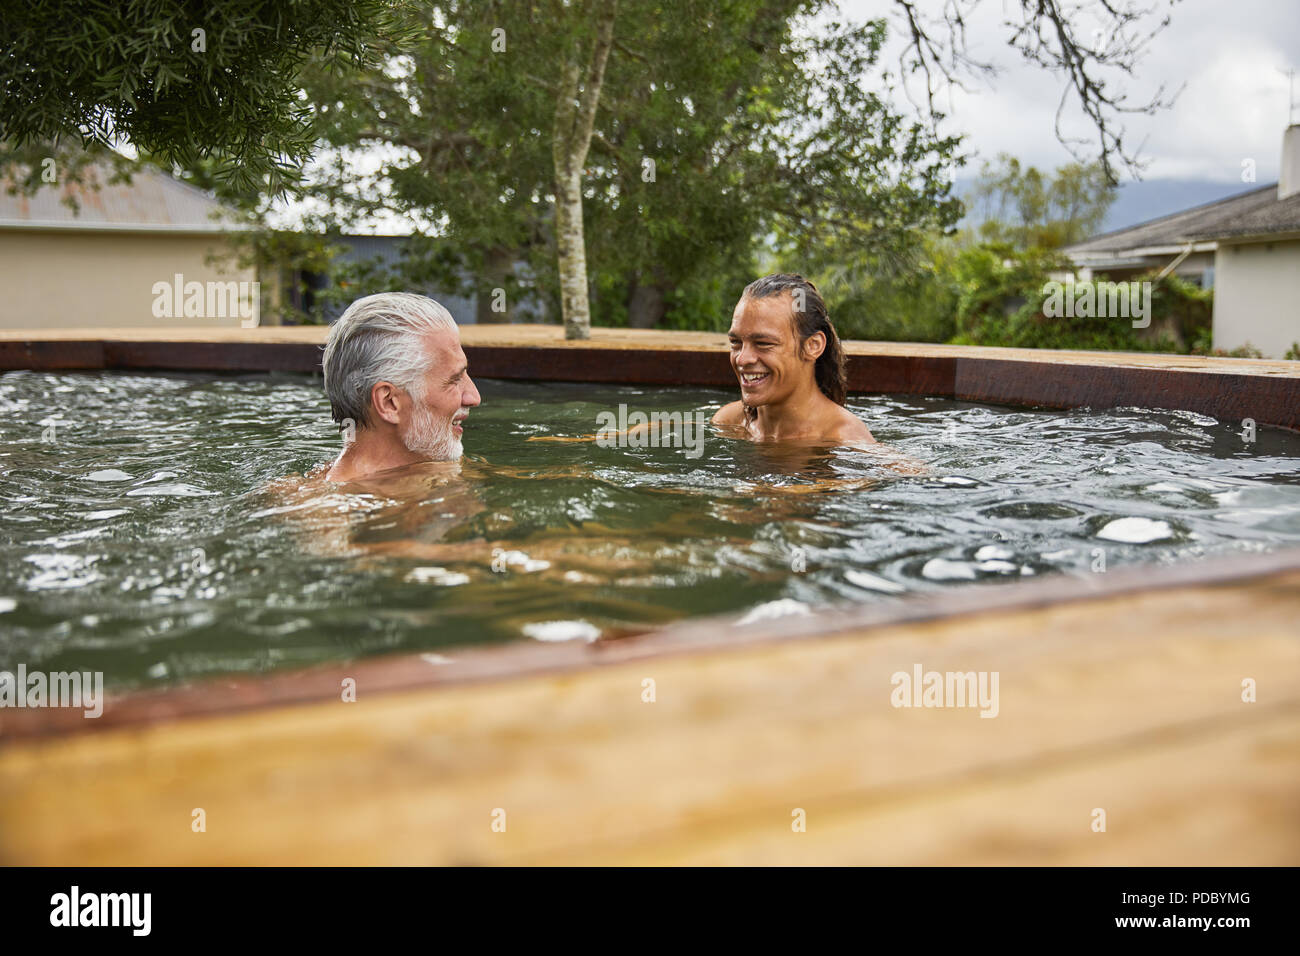 Father and son relaxing in hot tub Stock Photo